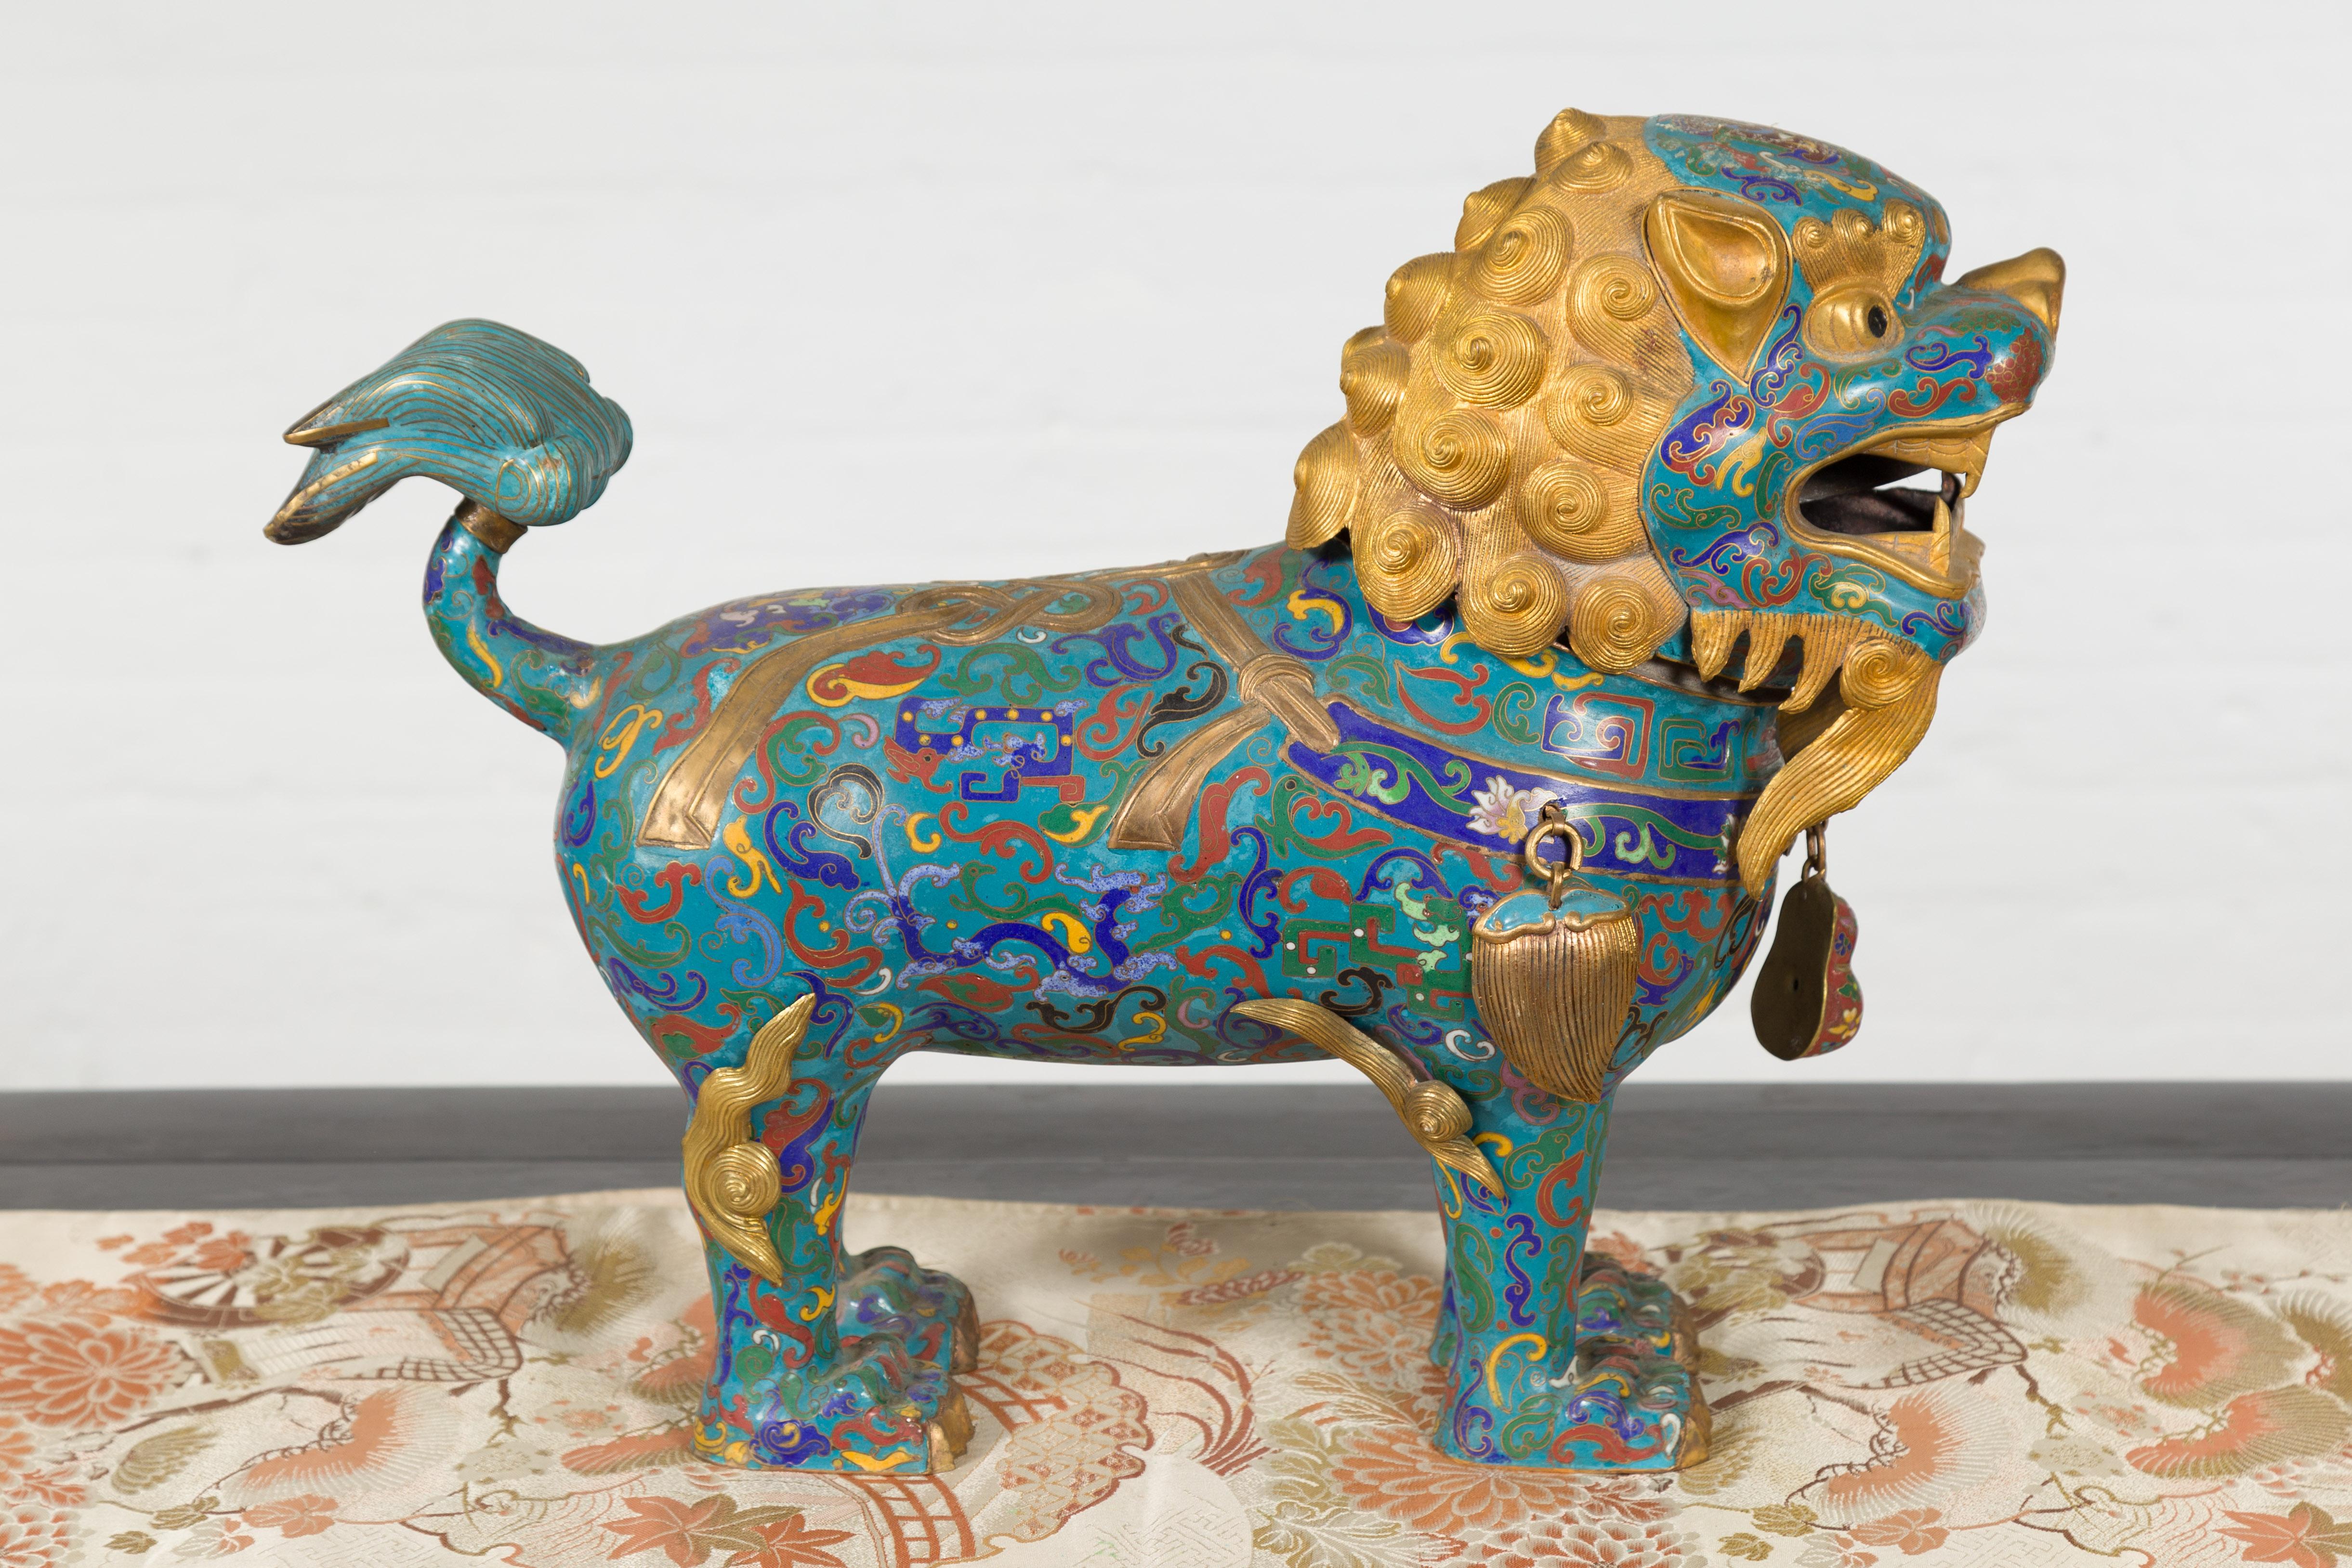 20th Century Chinese Vintage Metal Cloisonné Foo Dog Guardian Lion with Teal and Golden Tones